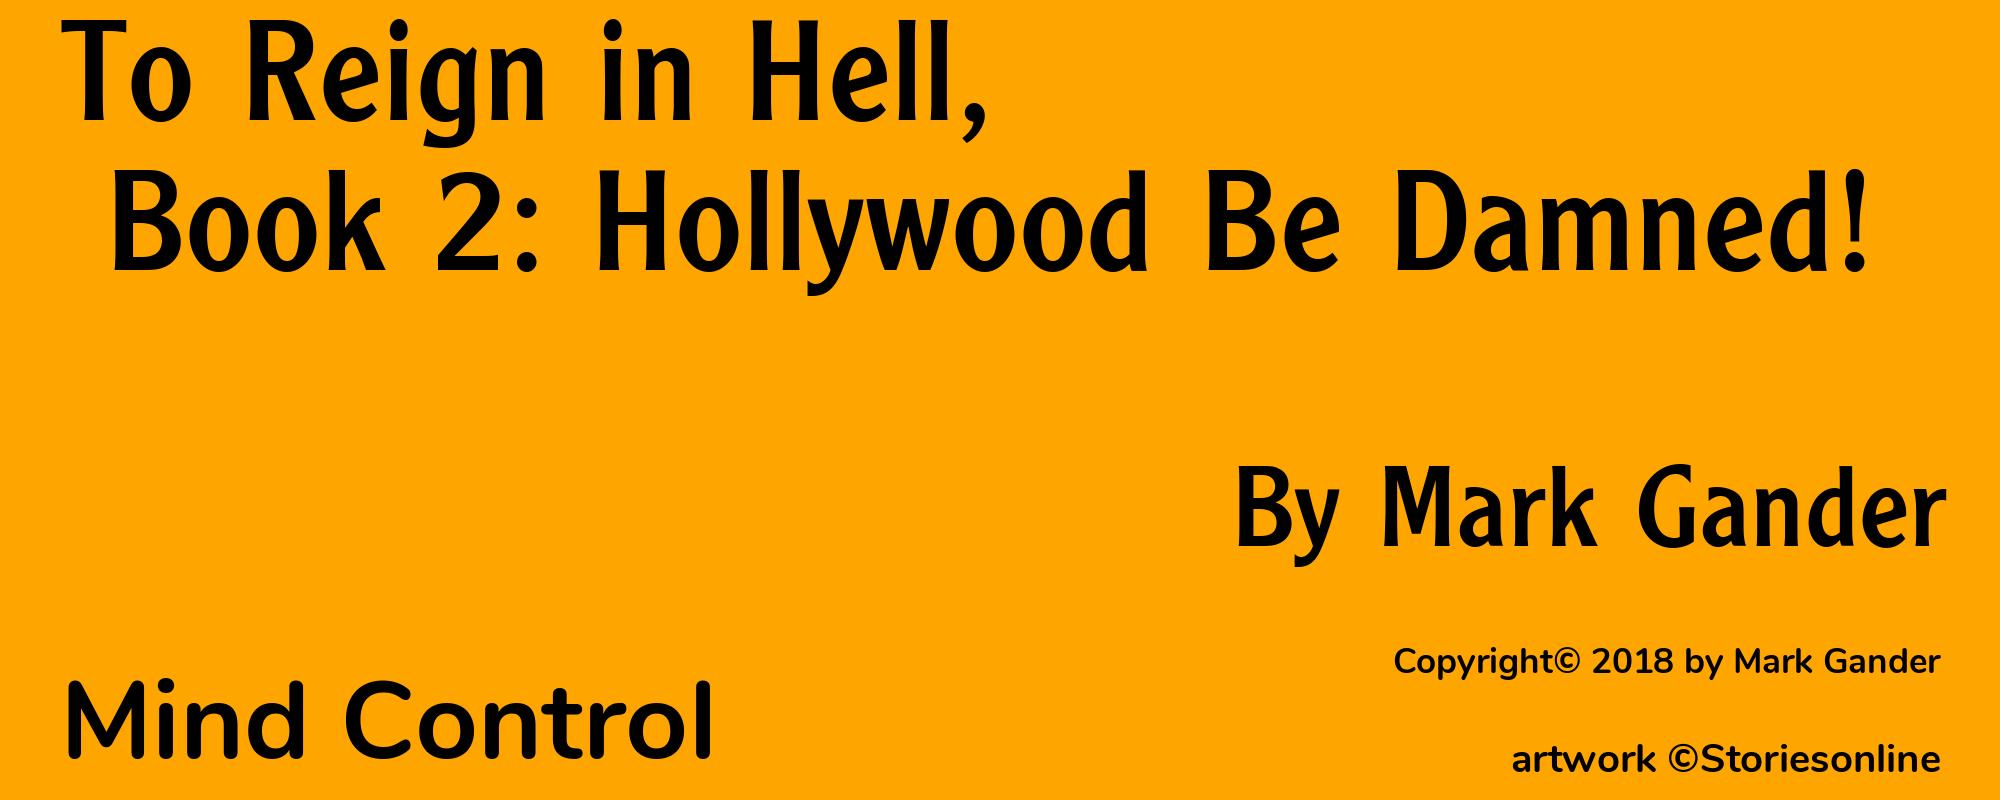 To Reign in Hell, Book 2: Hollywood Be Damned! - Cover